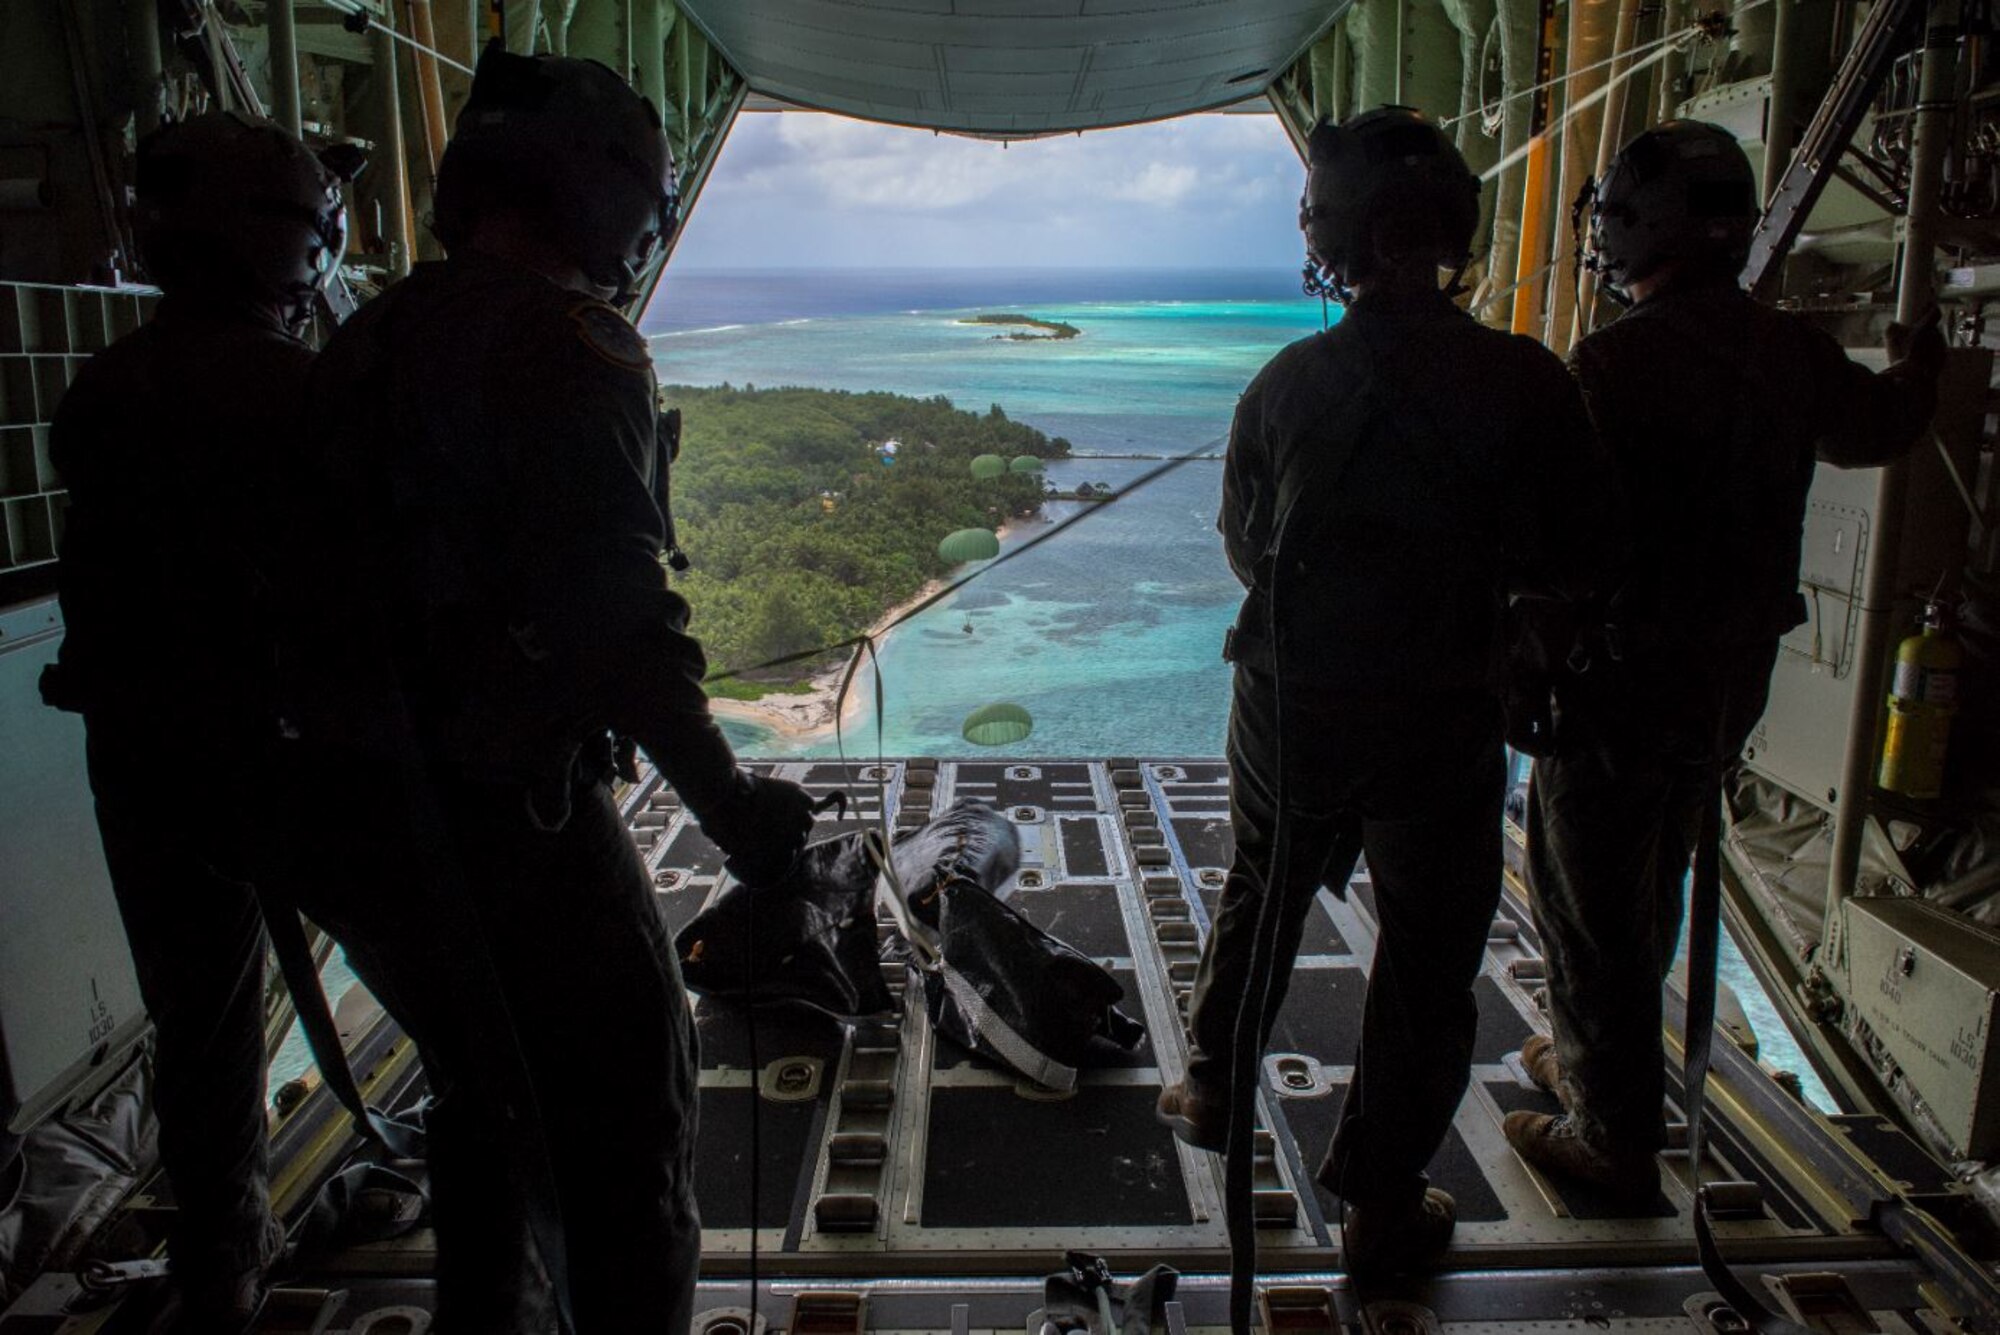 Loadmasters with the 36th Airlift Squadron out of Yokota Air Base, Japan, watch as the four Low-Cost, Low-Altitude humanitarian assistance bundles they just airdropped parachute down to those in need during Operation Christmas Drop 2019, at Nomwin, Federated States of Micronesia, Dec. 13, 2019. During 2020, Airmen will take strict measures to mitigate the transmission of COVID-19. Participating Airmen will wear a mask, wash their hands and practice social distancing. (U.S. Air Force photo by Senior Airman Matthew Gilmore)